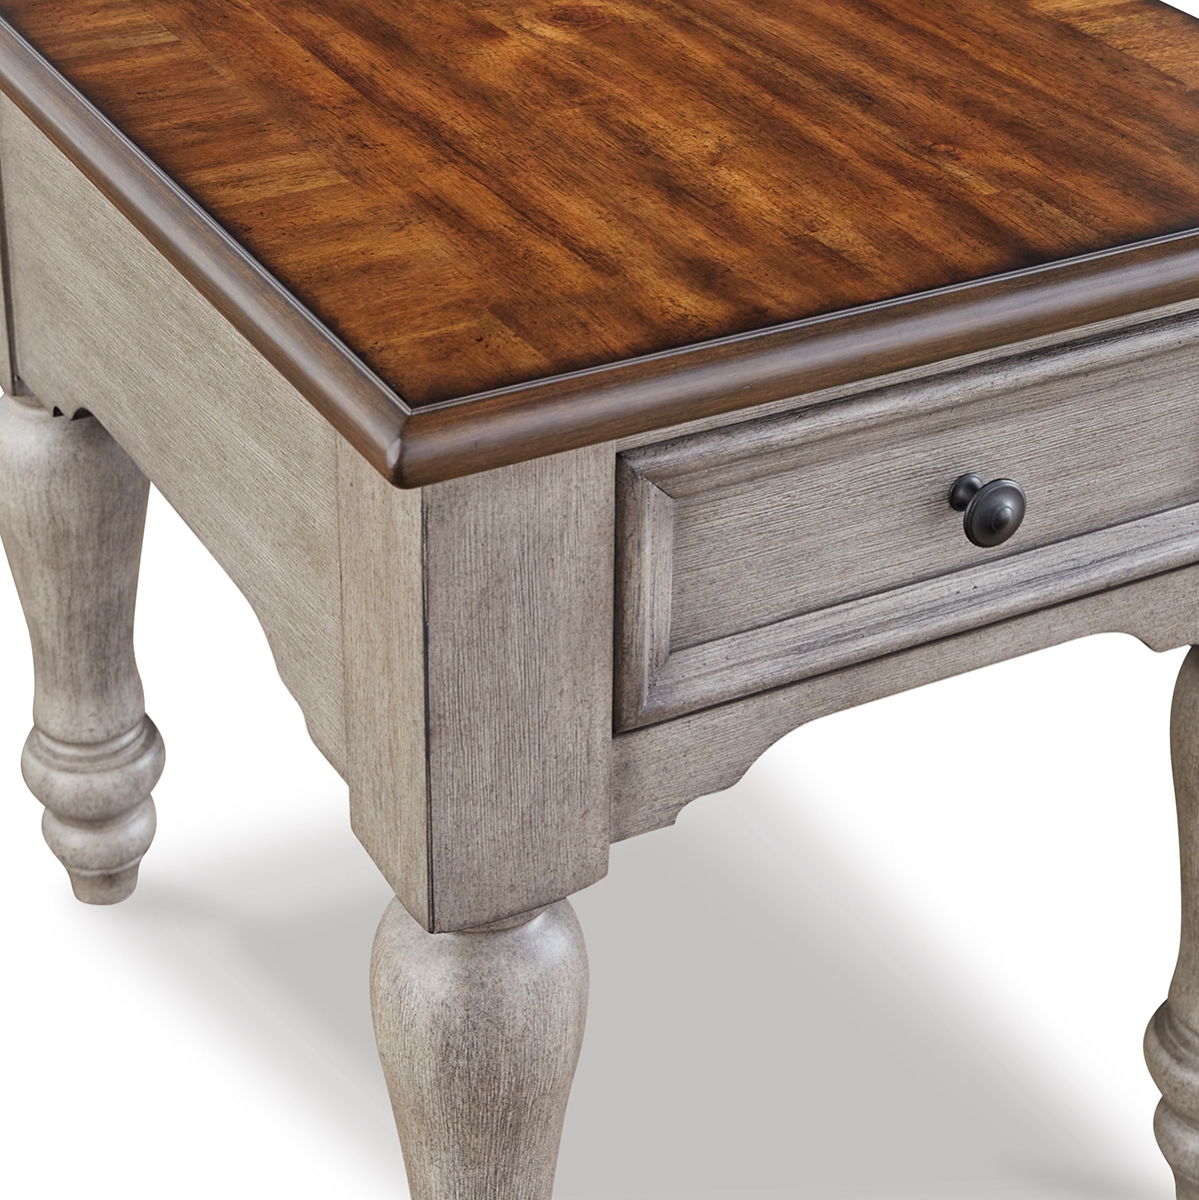 Picture of MAYFLOWER END TABLE